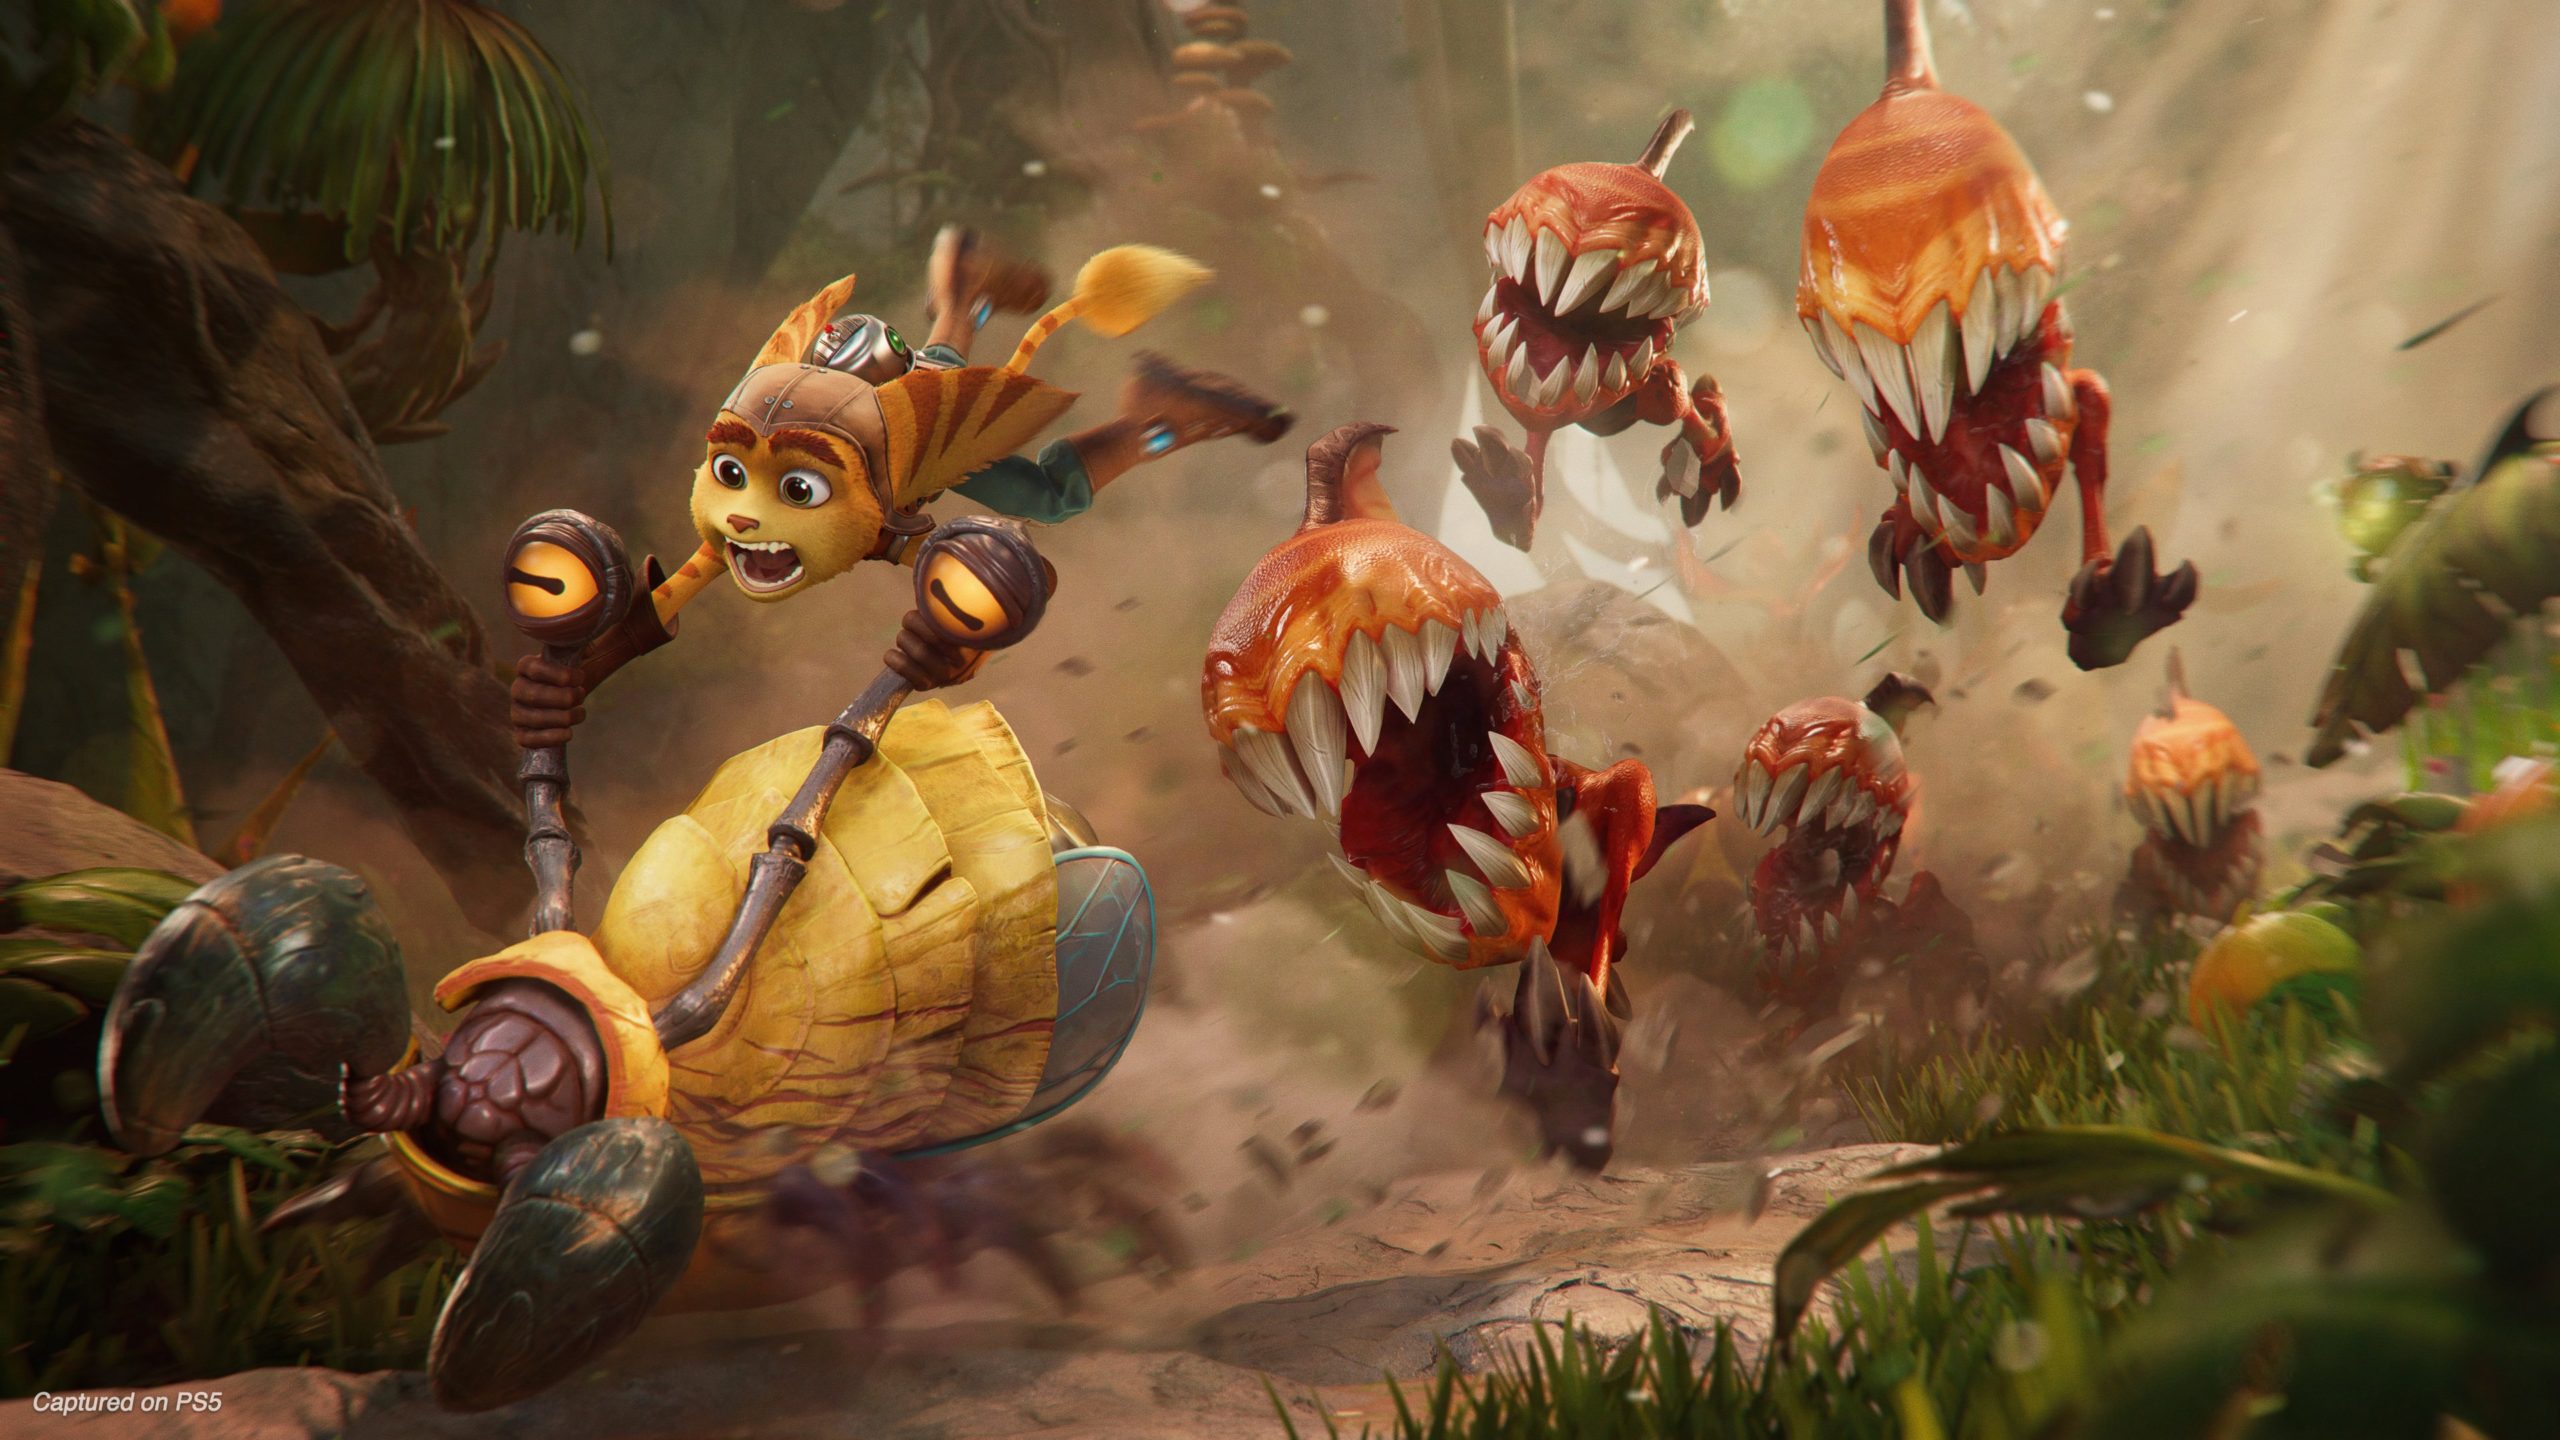 Ratchet riding a snail while little dinosaur like enemies with huge mouths and sharp teeth chase them